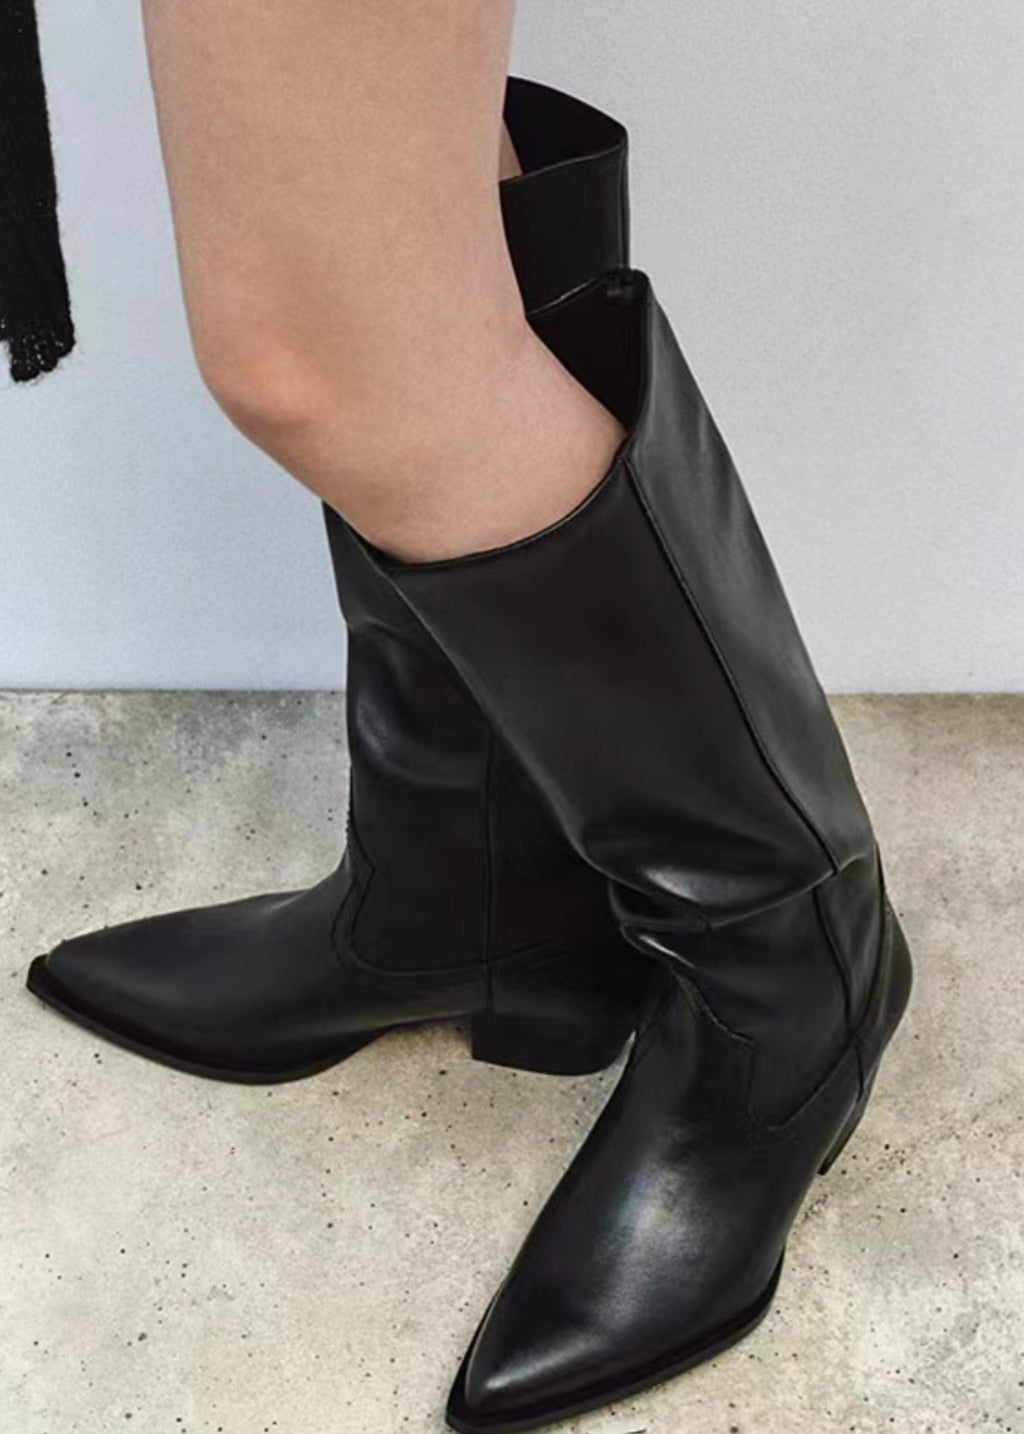 Black Pointed -Toe Knee Leather Boots